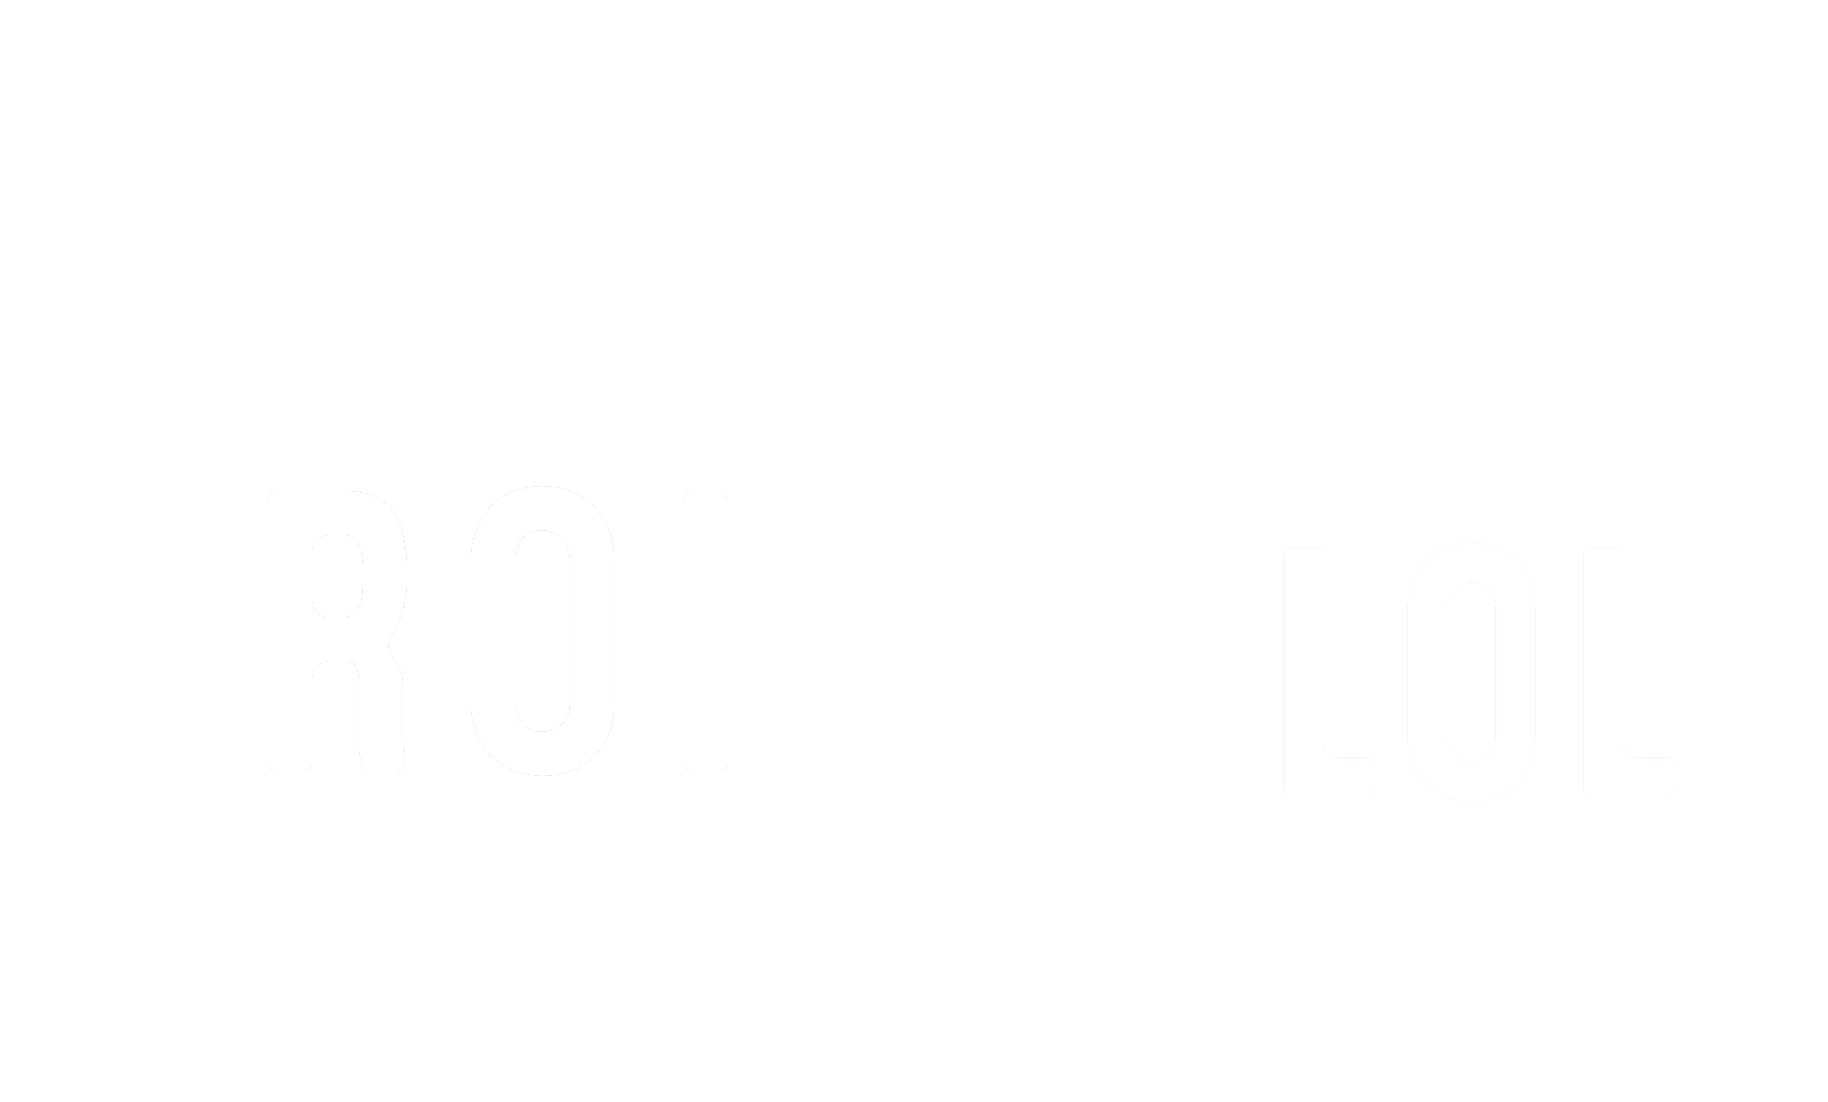 Image of The ROI of LOL logo